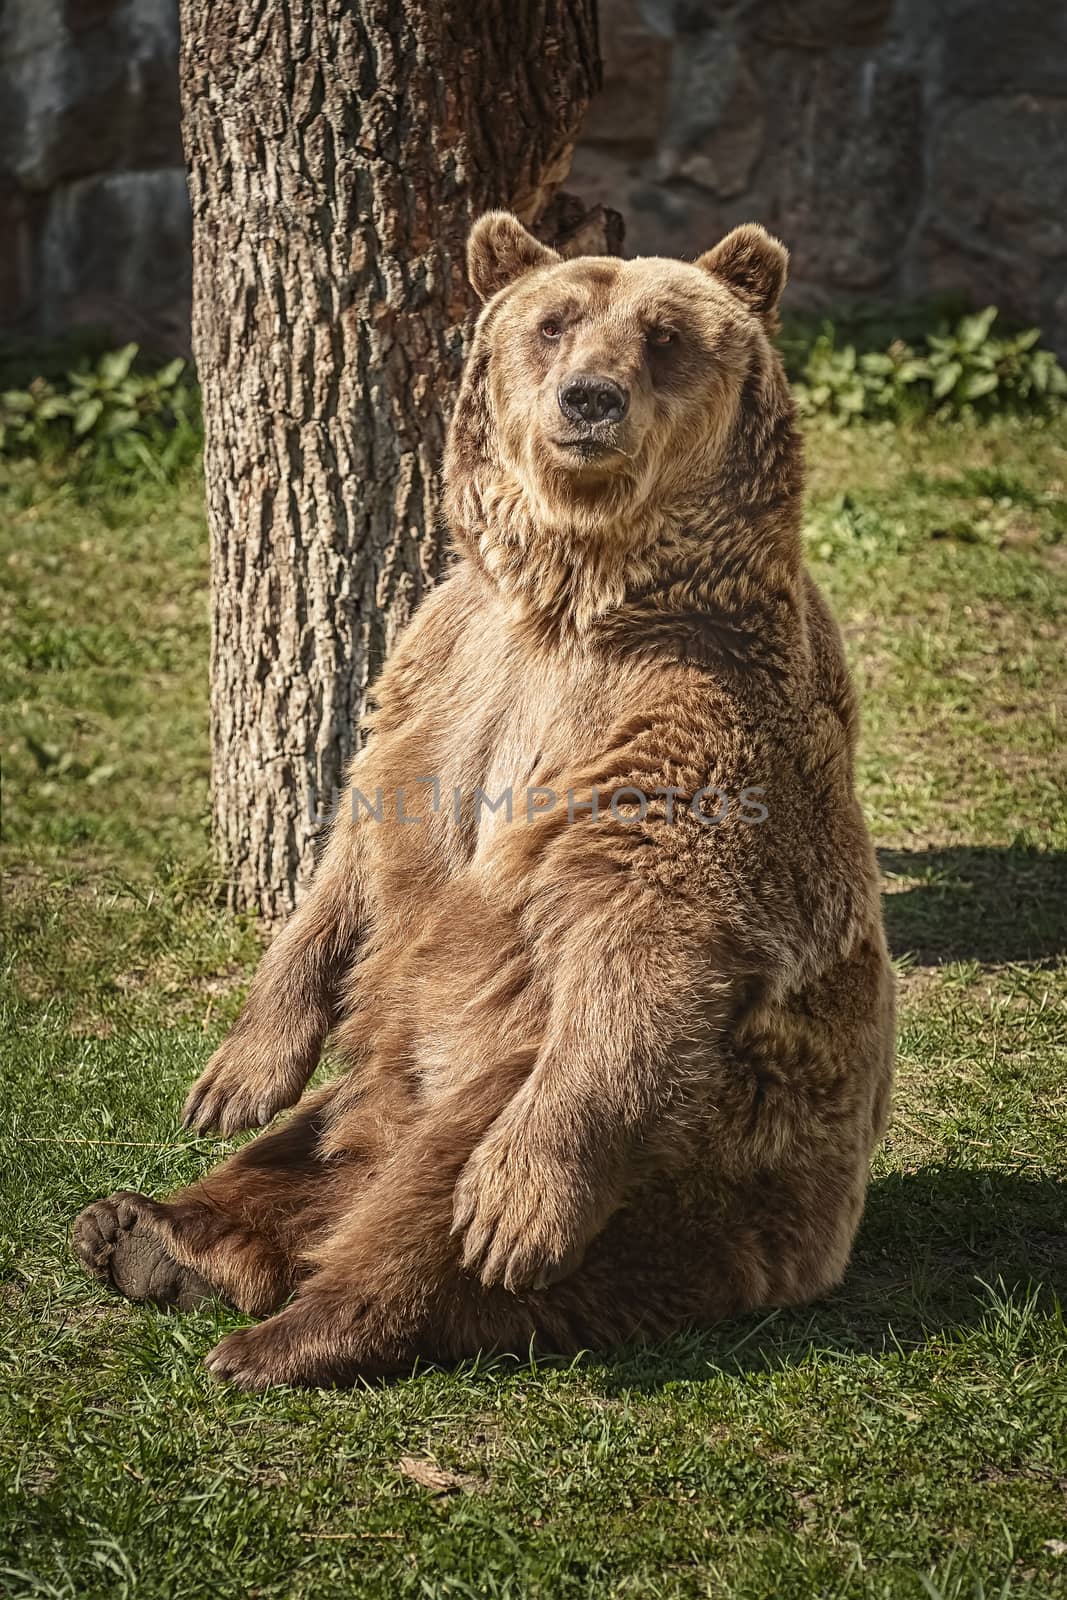 Brown bear resting on the green lawn